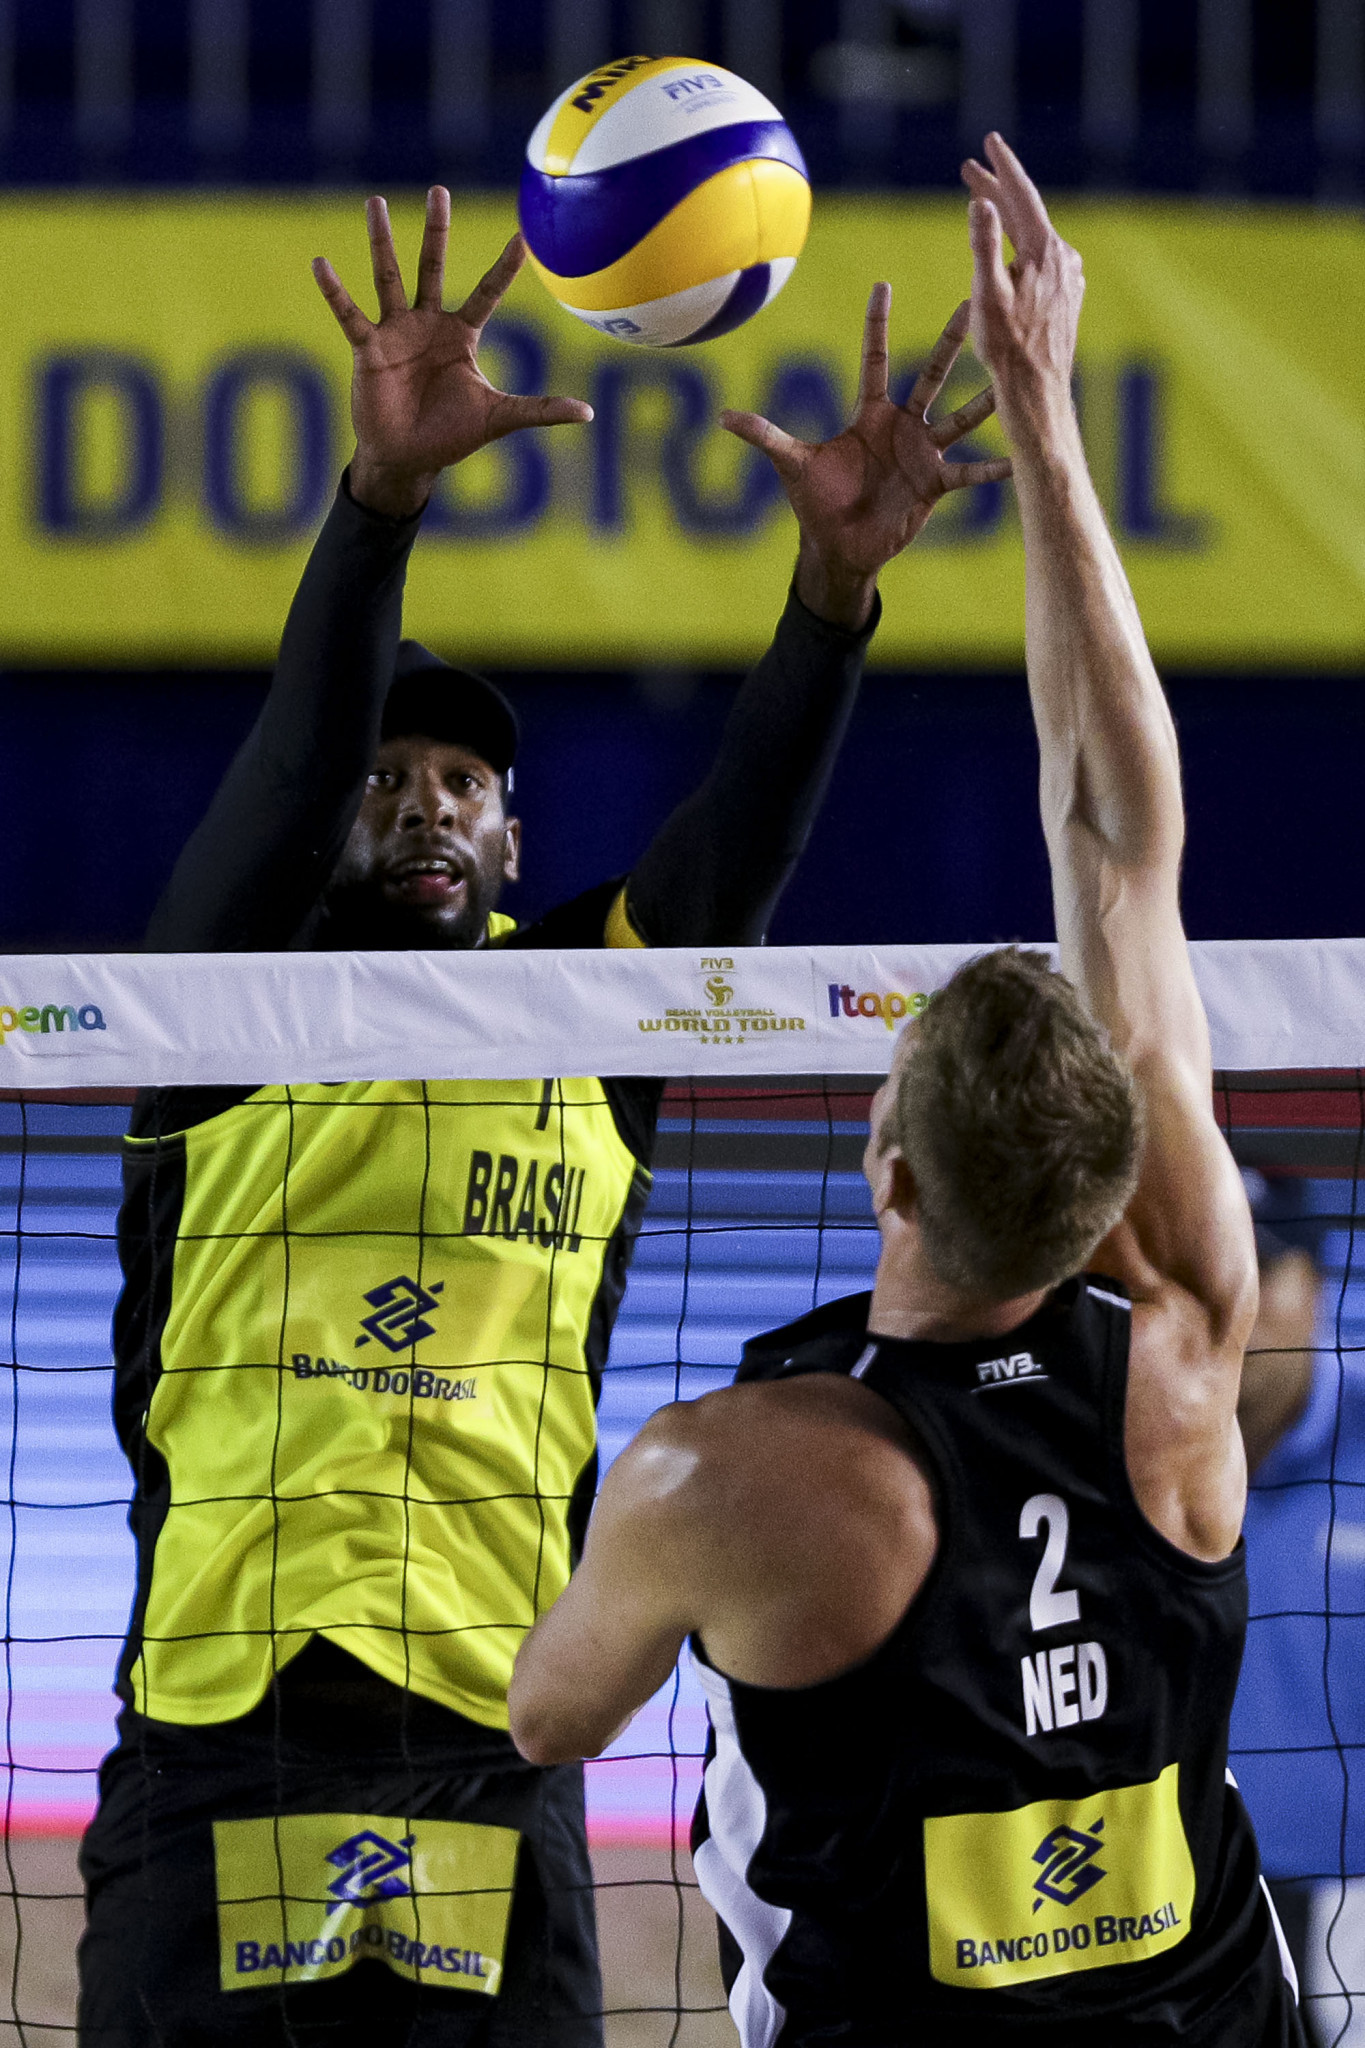 Brazilians Evandro Gonçalves de Oliveira Junior and Bruno Oscar Schmidt claimed glory at the International Volleyball Federation Beach World Tour event in Warsaw ©Getty Images